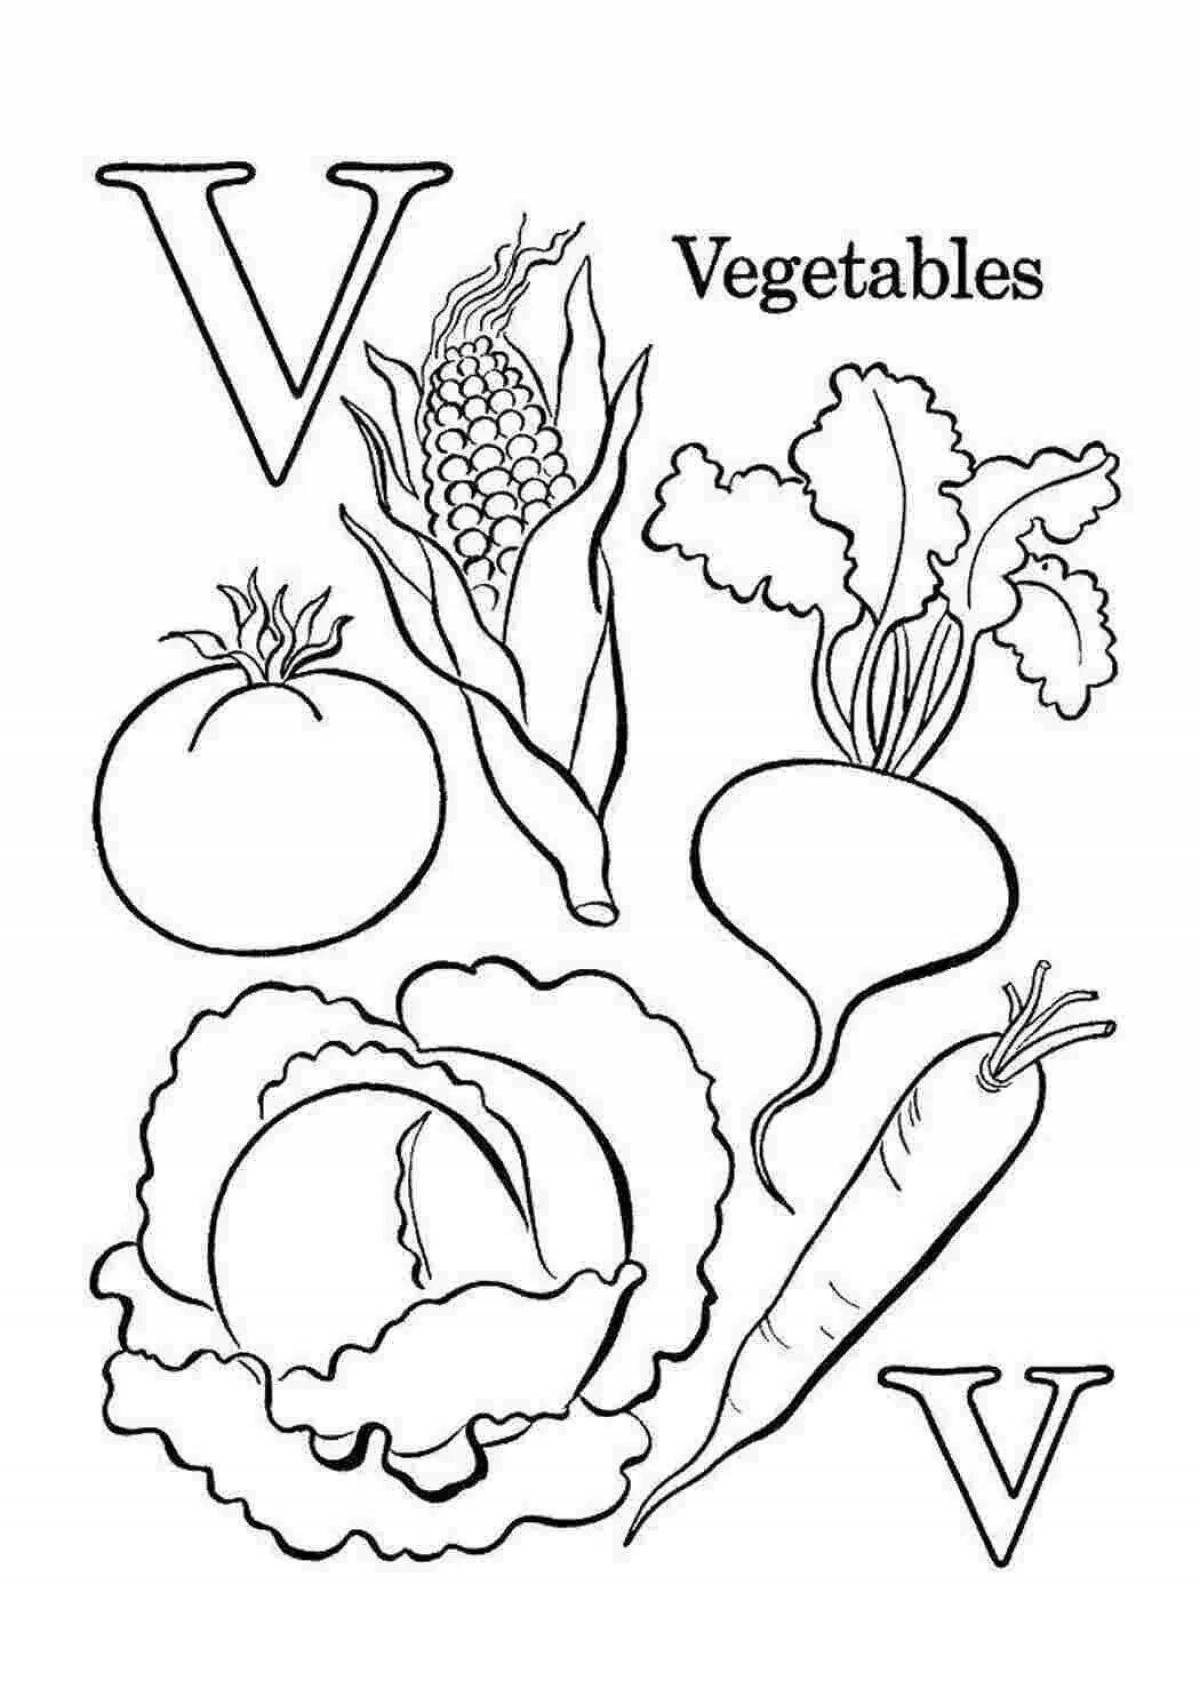 Bright vegetable coloring book for kids